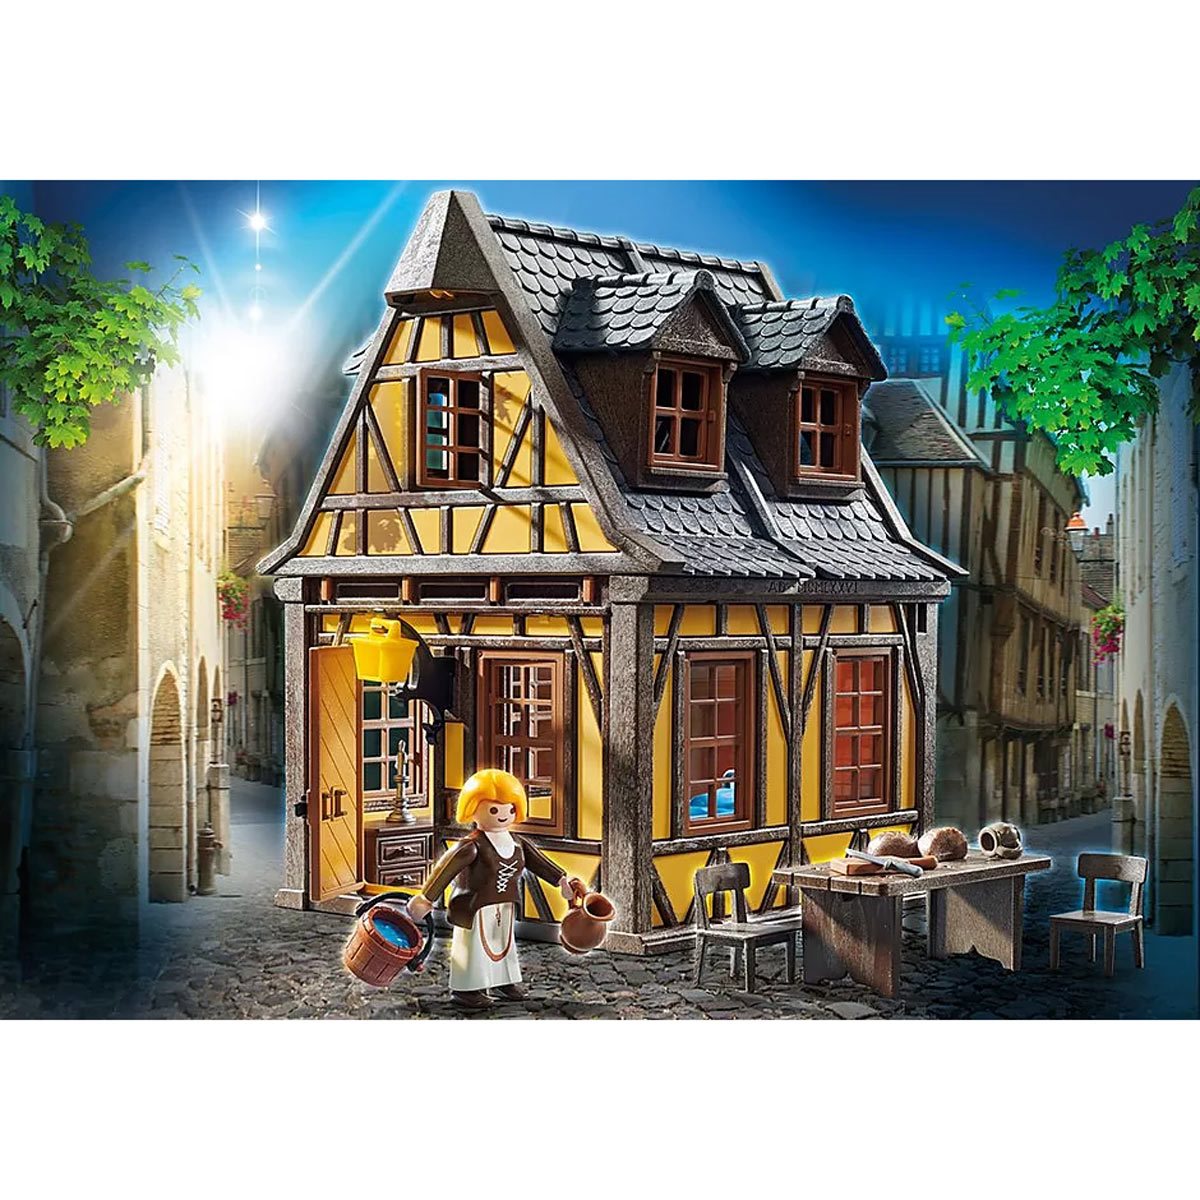 Playmobil 70953 Medieval Prison Tower - Entertainment Earth